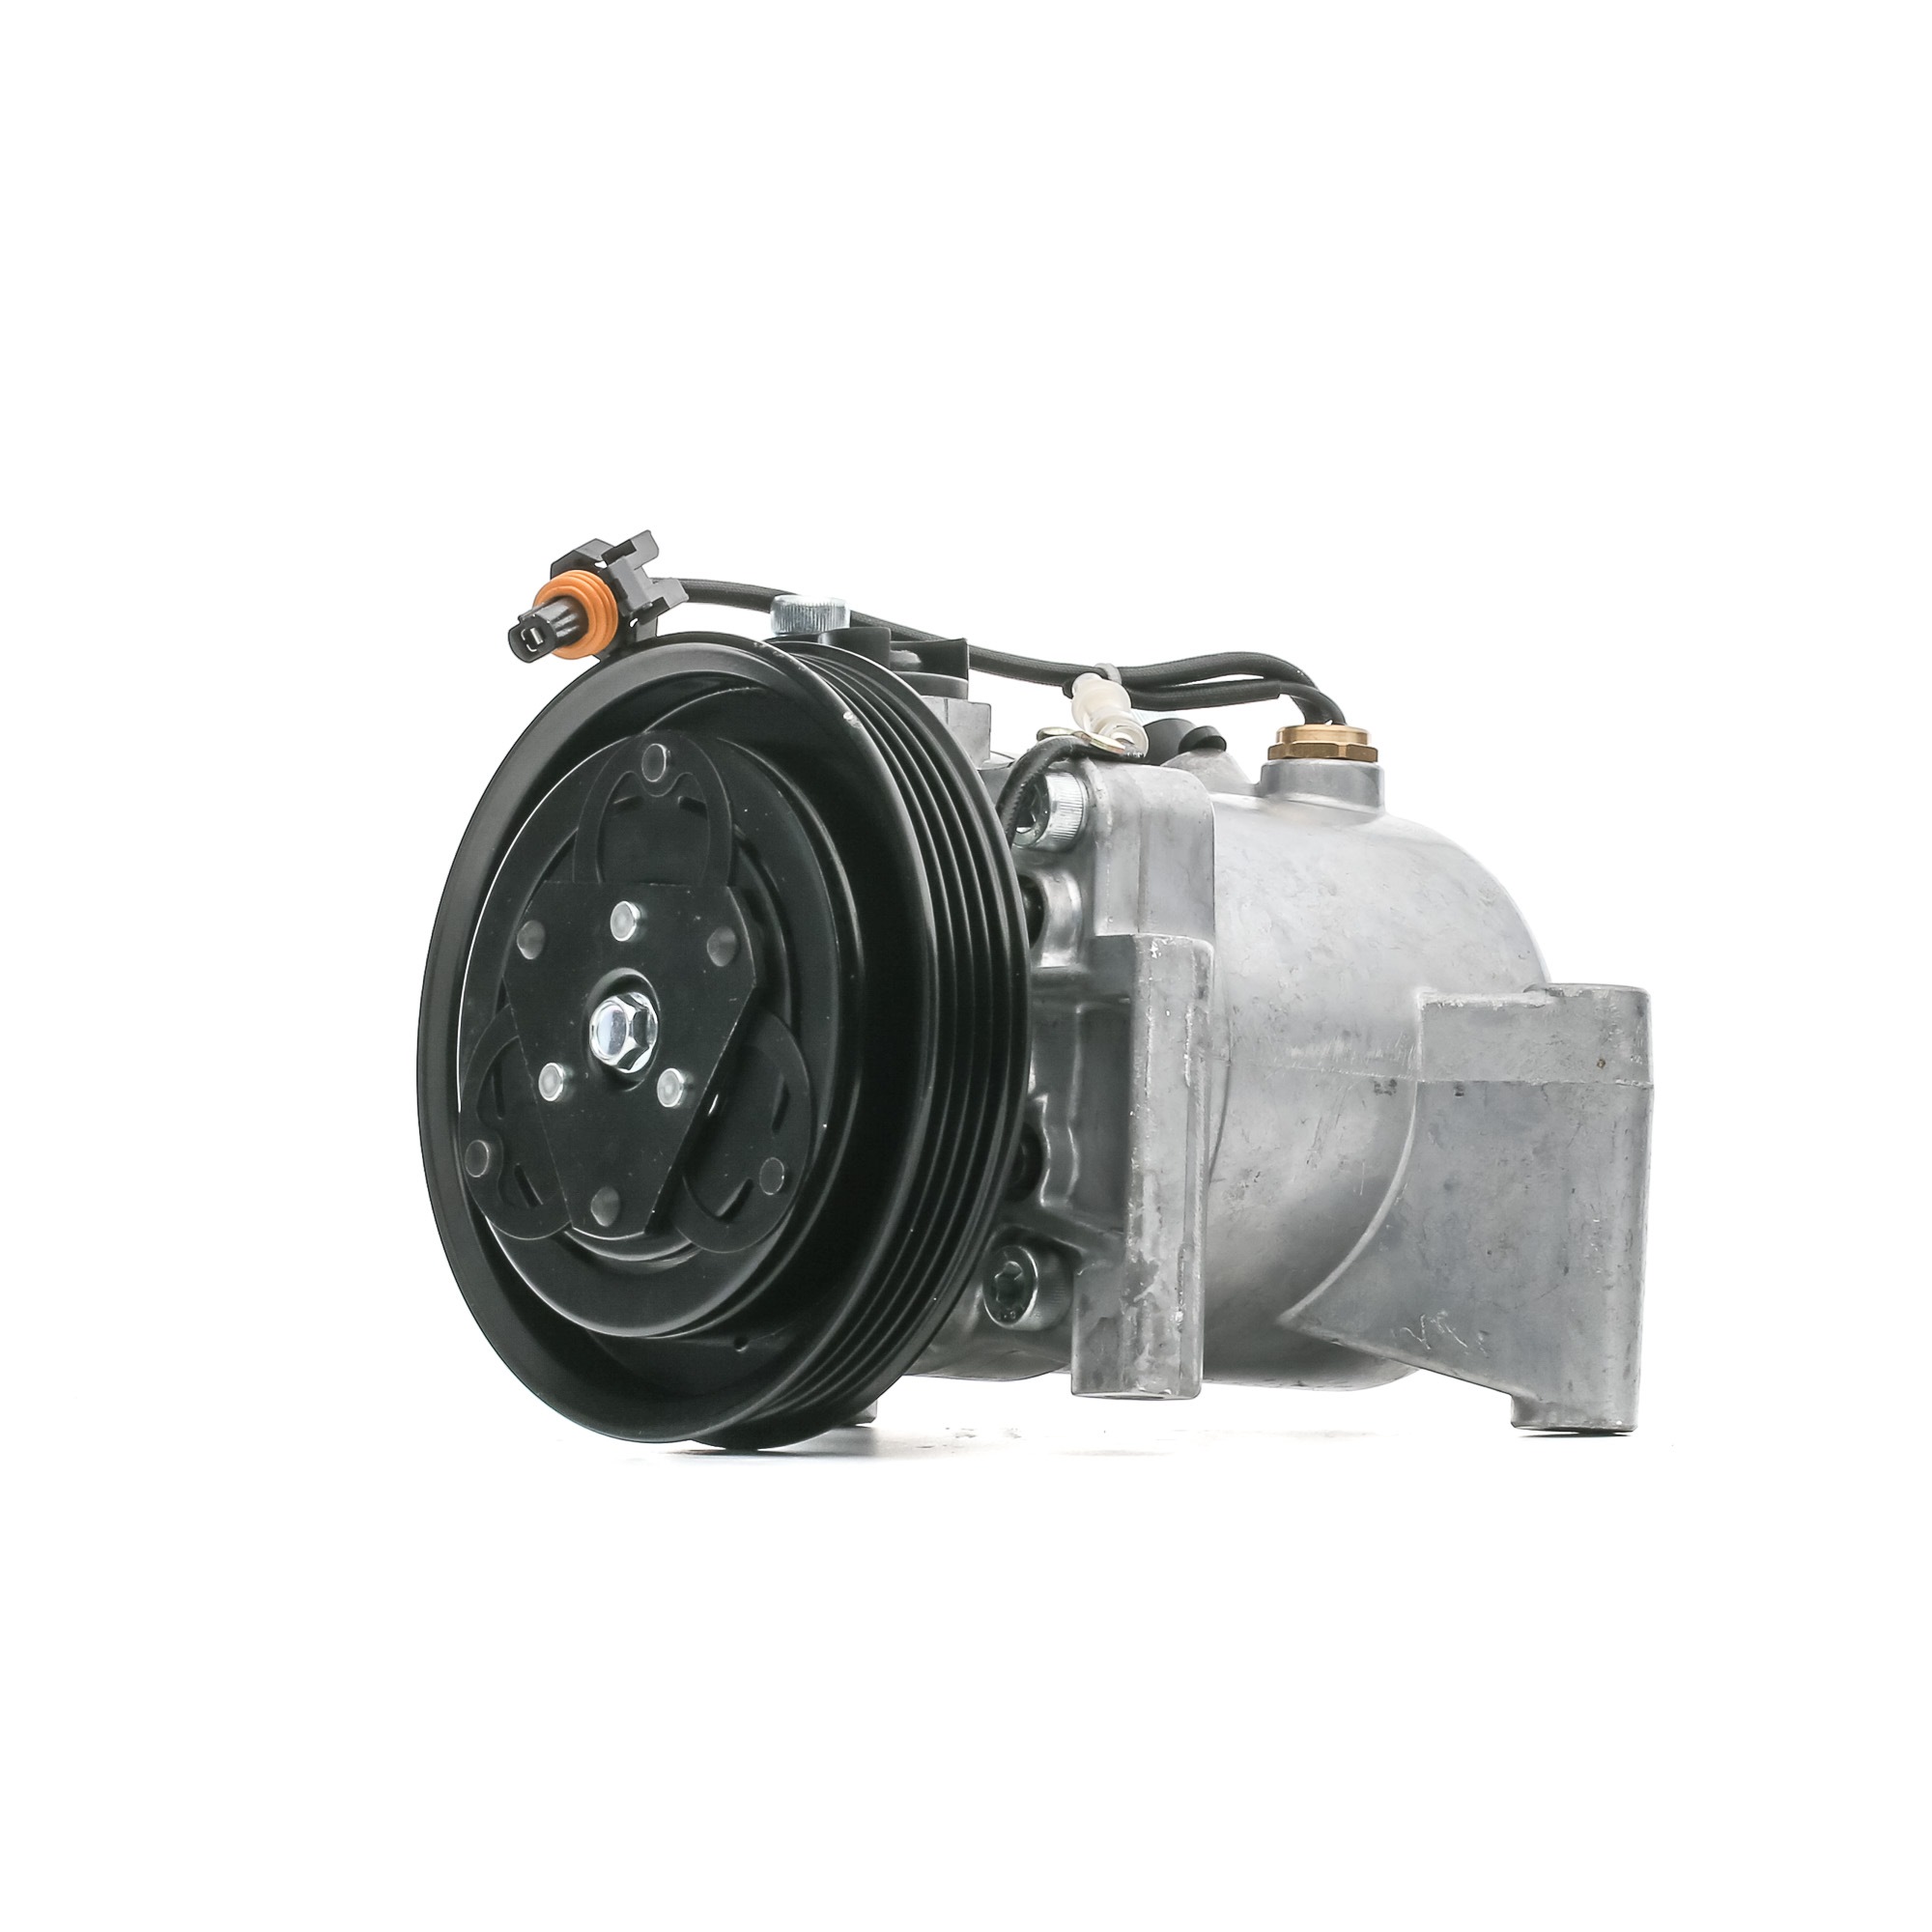 STARK SKKM-0340377 Air conditioning compressor SMART experience and price